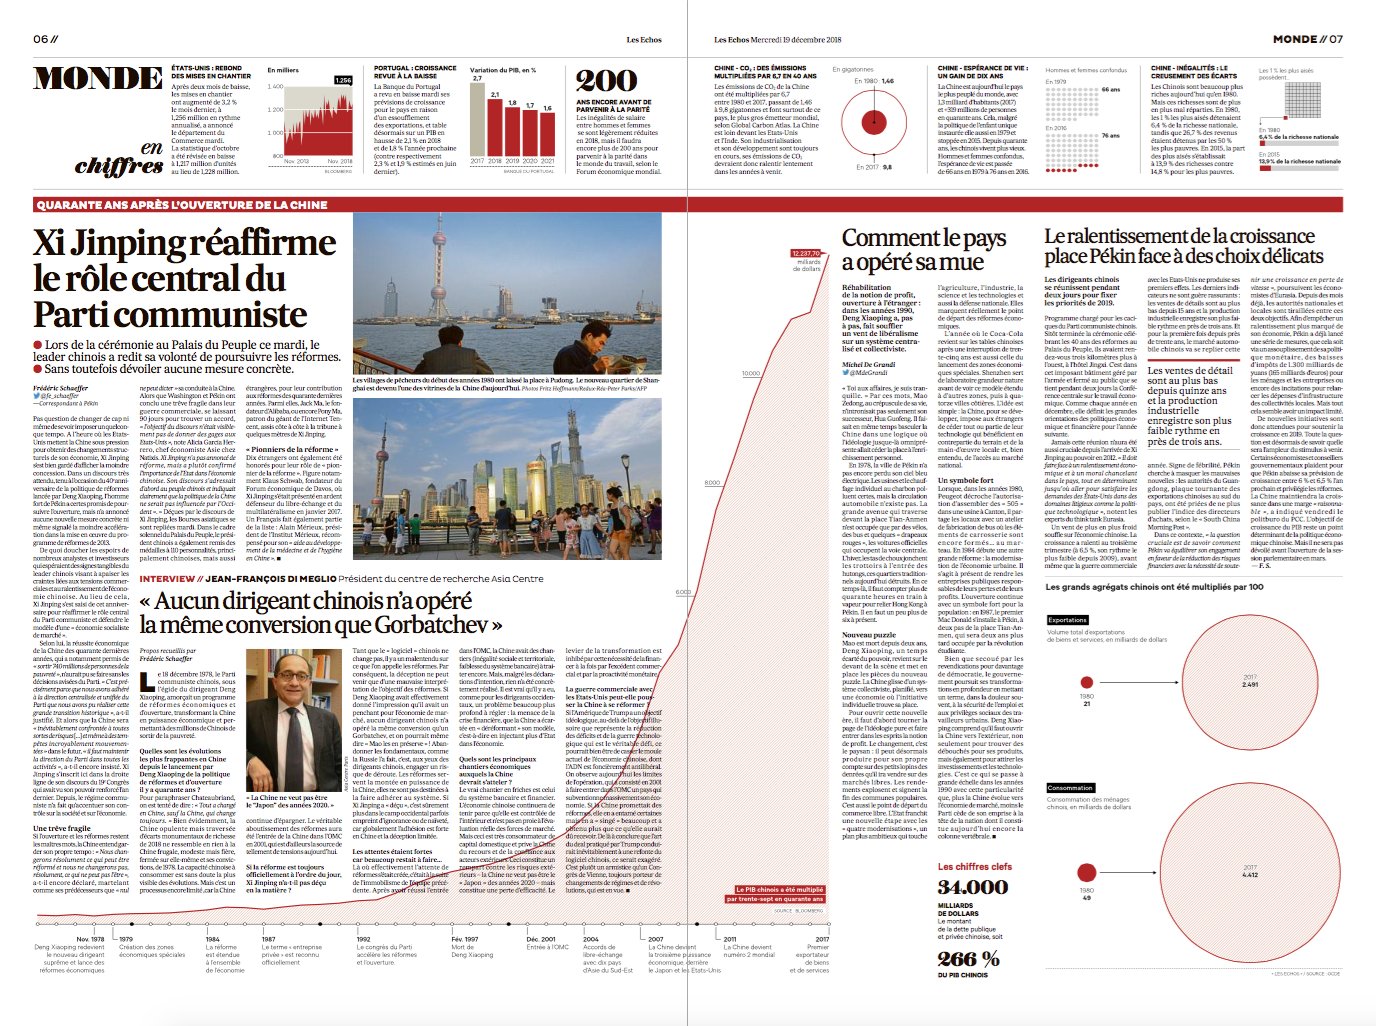 A spread of newspaper Le Monde, with a line chart running over the text and onto the next page